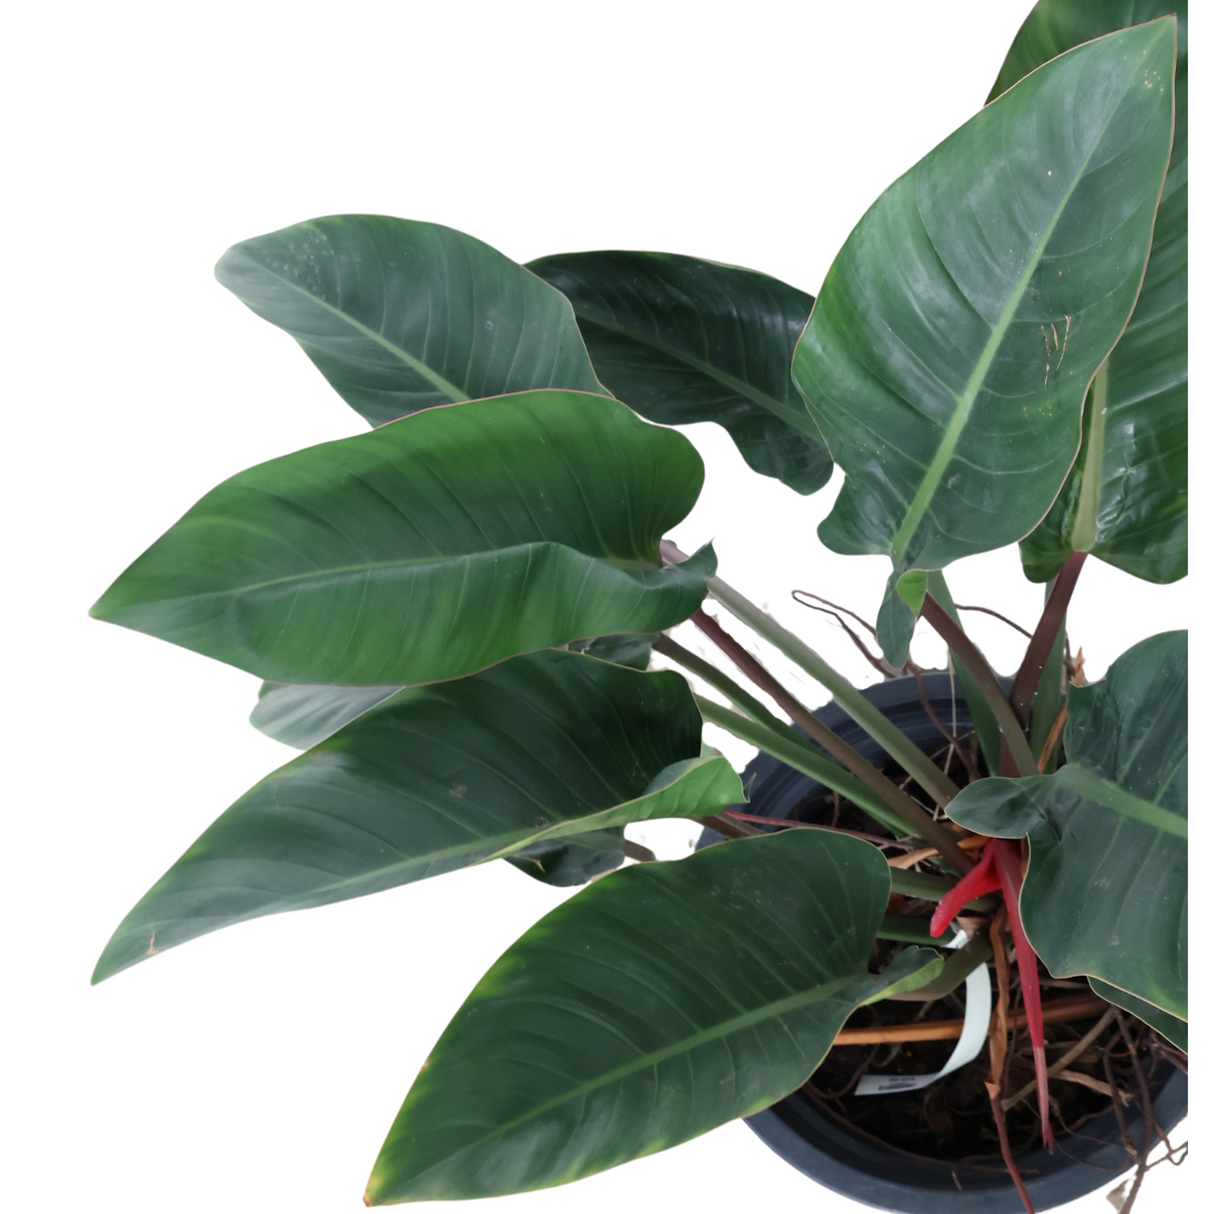 Philodendron Red Congo in Ceramic Pot (1m)